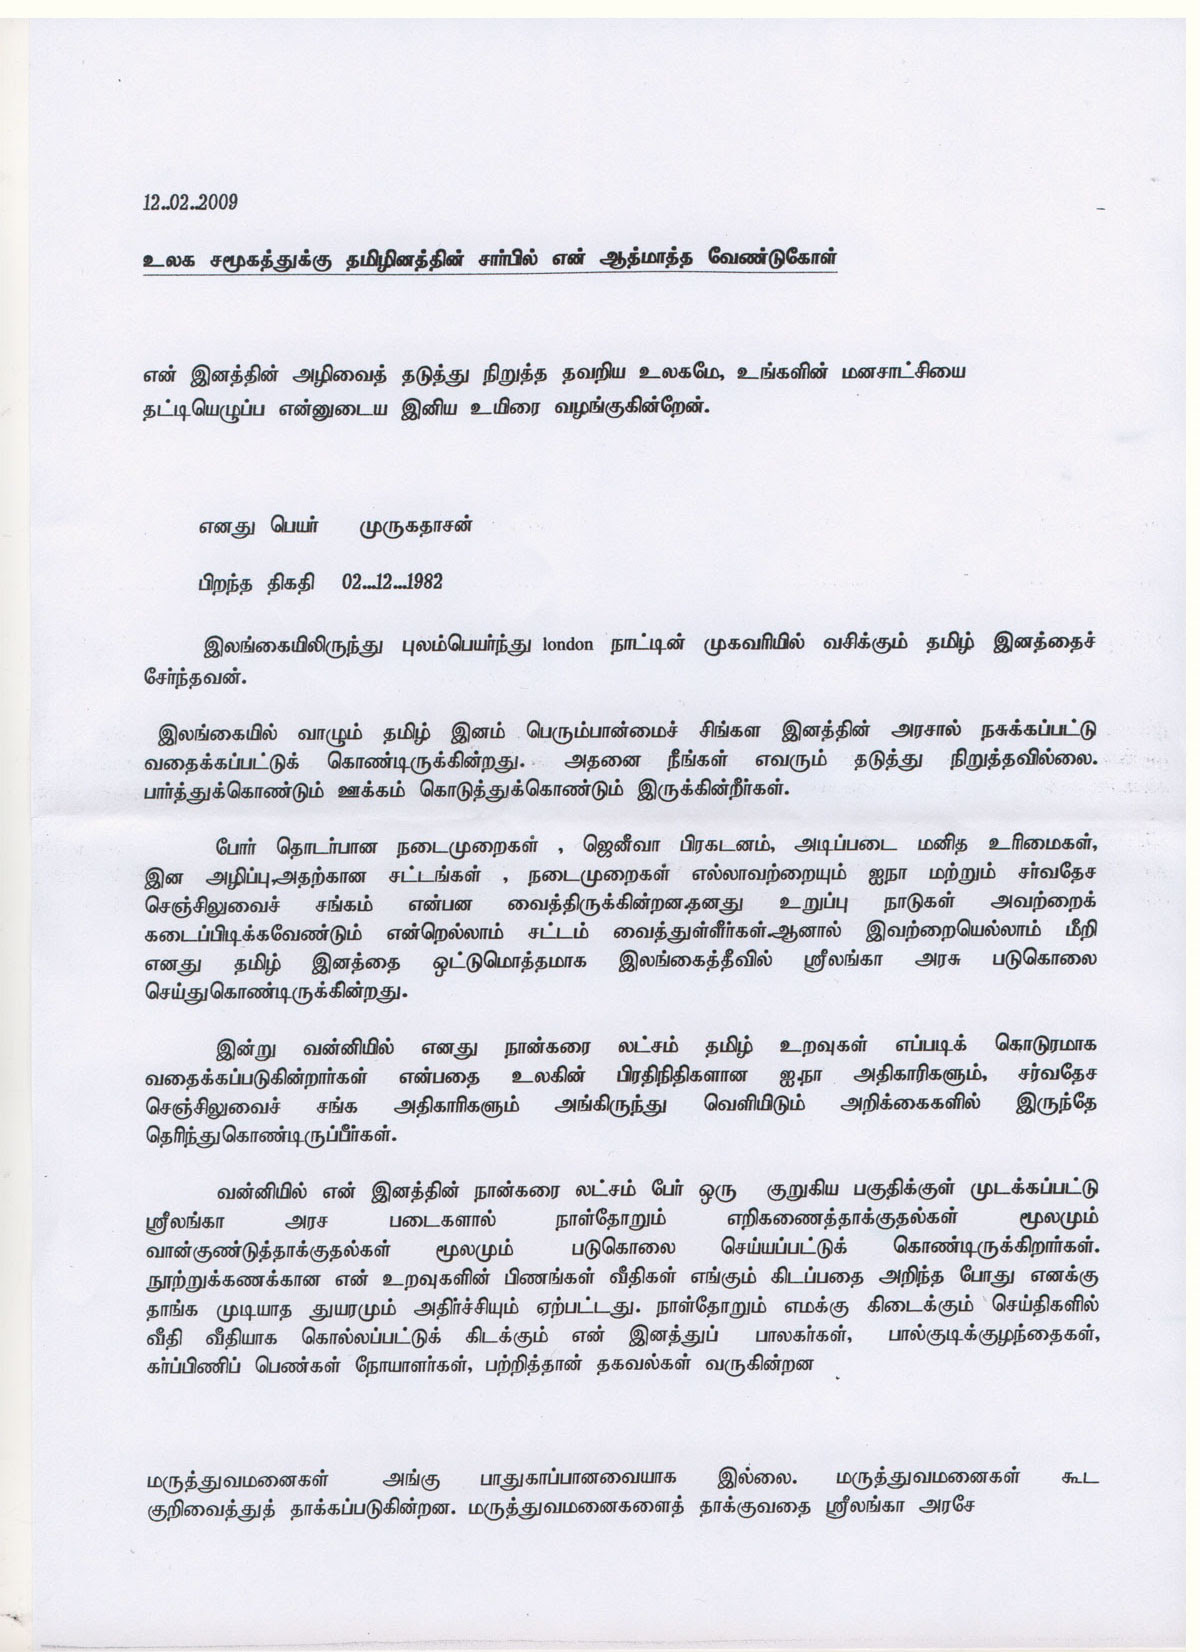 personal statement meaning in tamil